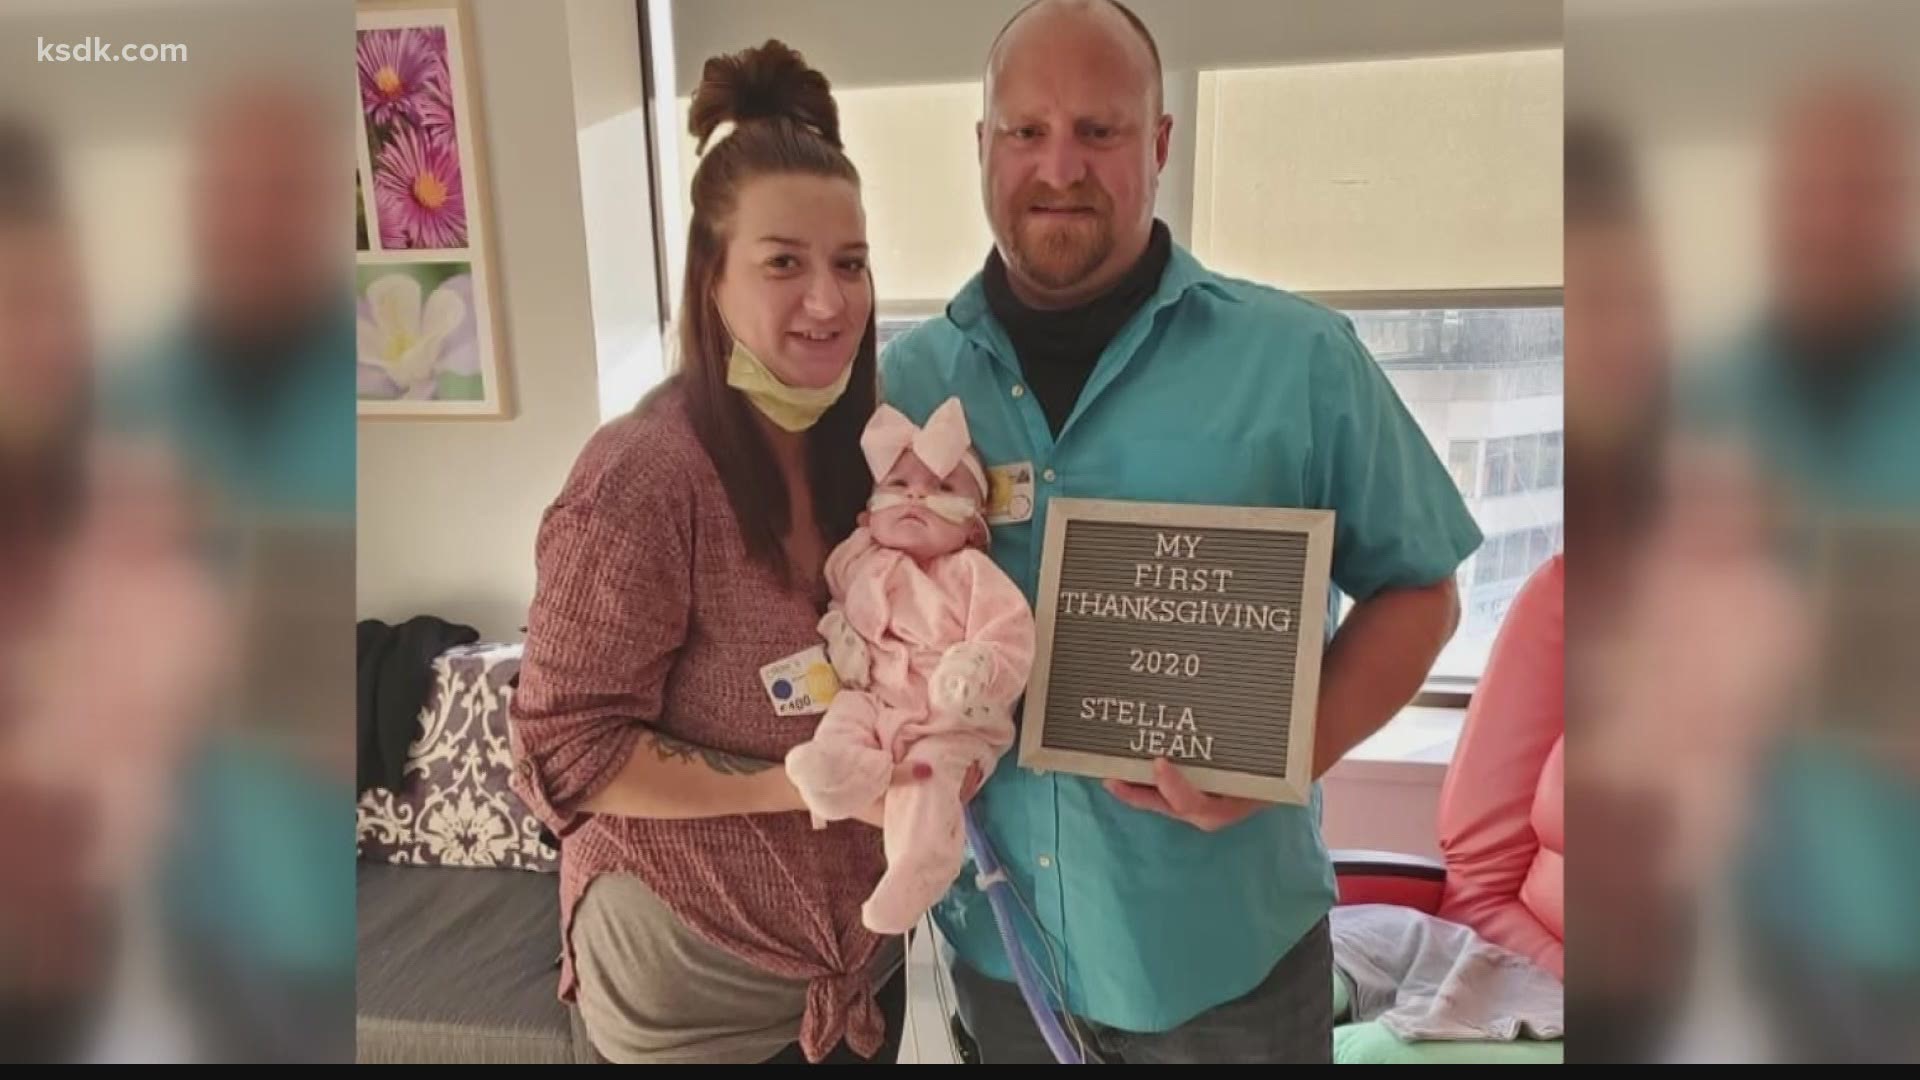 The new parents are going back to Kansas City after getting out of the NICU